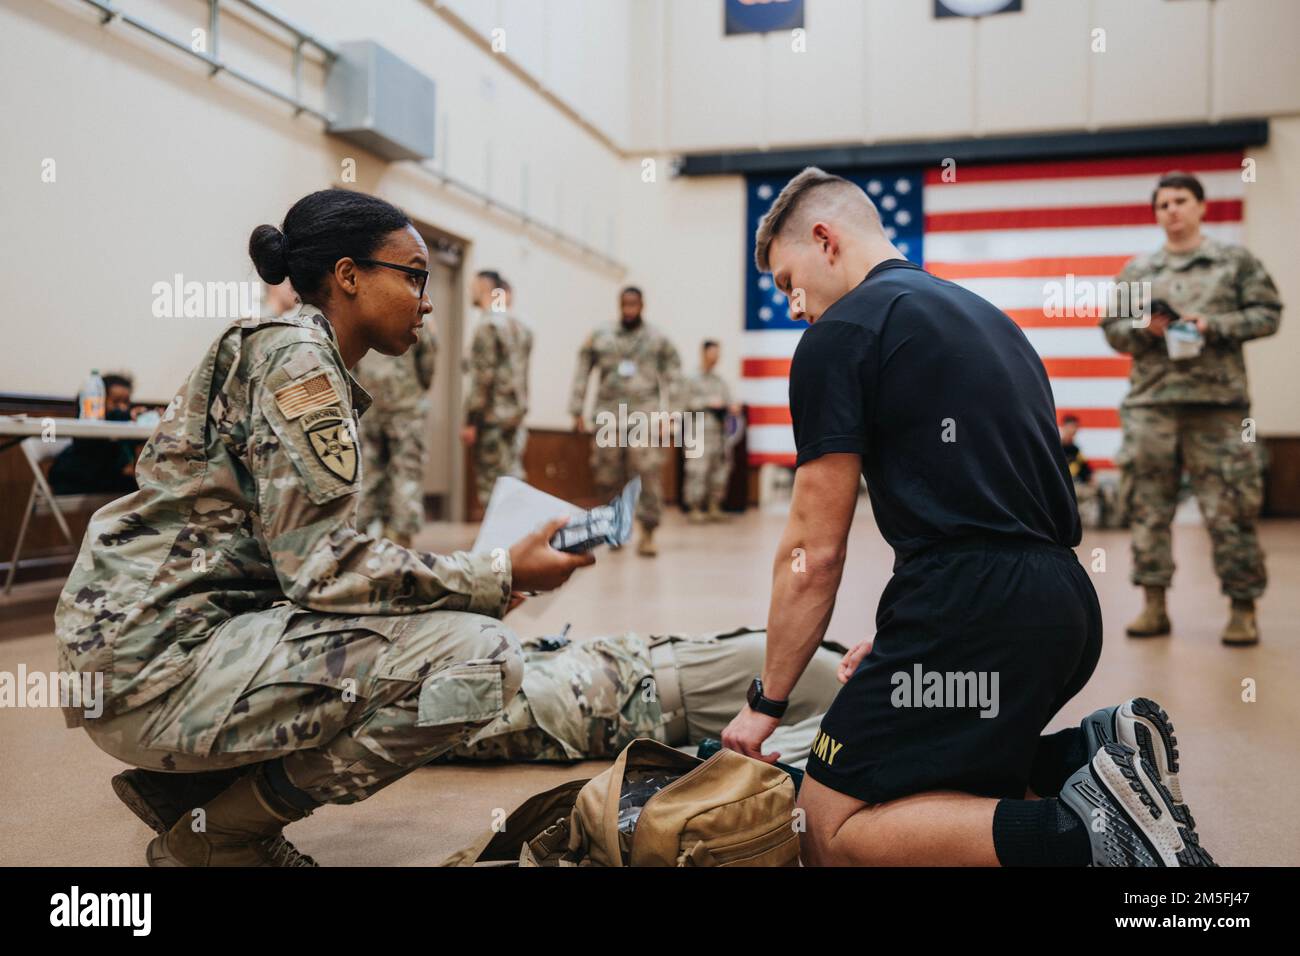 U.S. Air Force Tech. Sgt. Malissa Richardson(left), a Med Tech with the Joint Communications Support Element, instructs Spc. Micheal Crantson on different ways to treat battlefield wounds and extremities during the 335th Best Warrior Competition, at MacDill Air Force Base, Florida, March 12, 2022. Contestants from the 335th Signal Command (Theater), 200th Military Police Command, and Army Reserve Legal Command, participate in the Combined Best Warrior/Best Squad competition in Tampa, Florida, March 11-19, 2022. The two finalists from each command will then compete at the United States Army Res Stock Photo